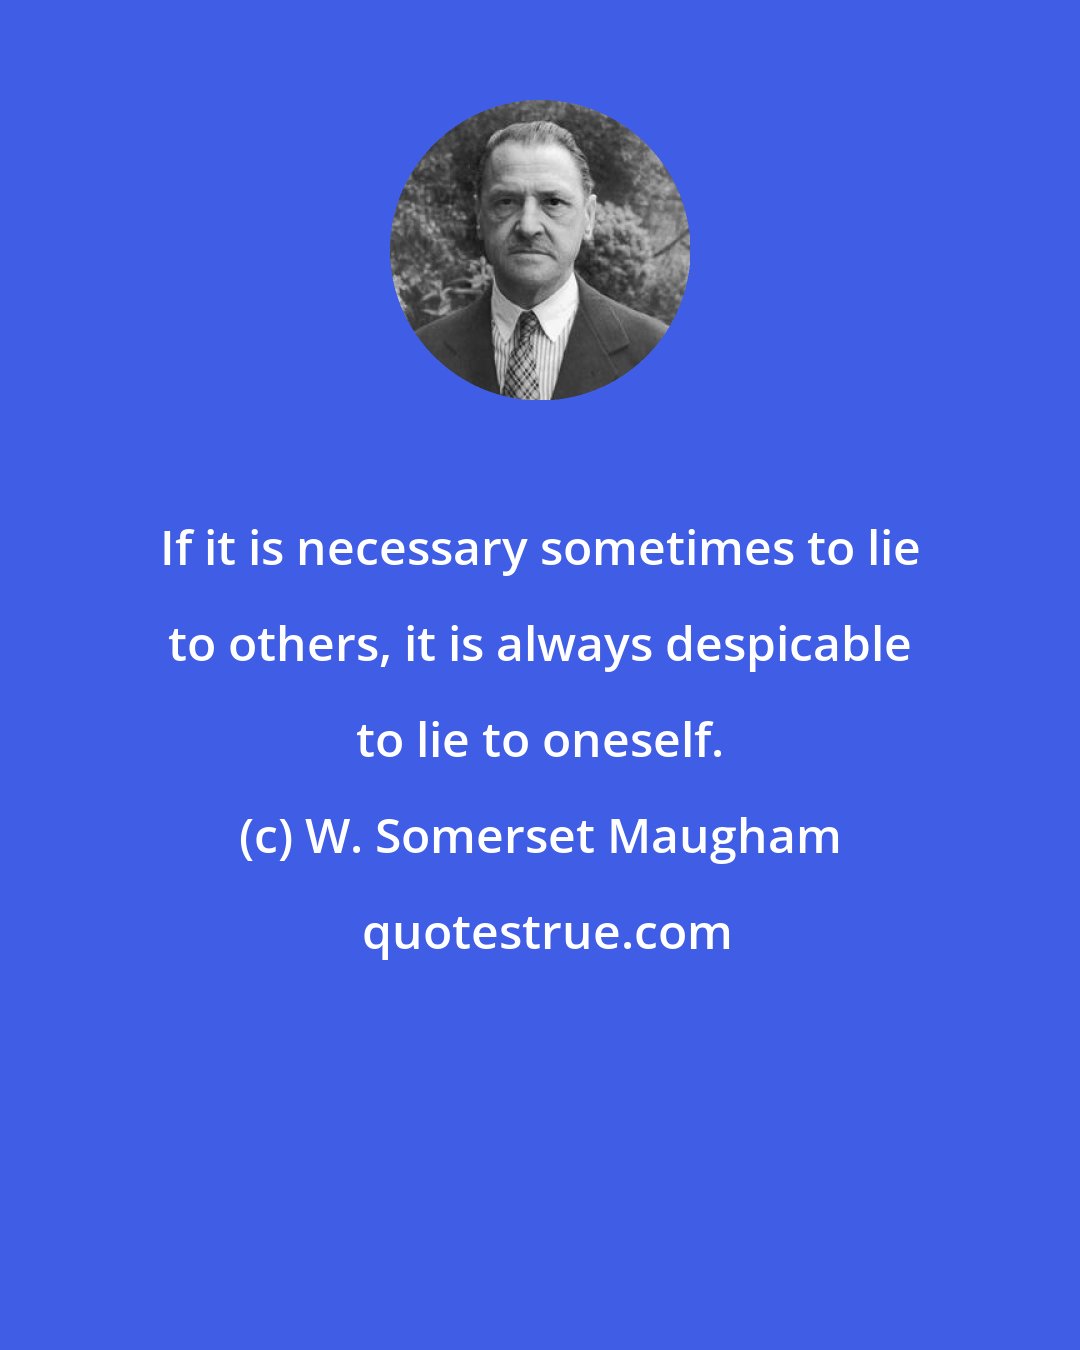 W. Somerset Maugham: If it is necessary sometimes to lie to others, it is always despicable to lie to oneself.